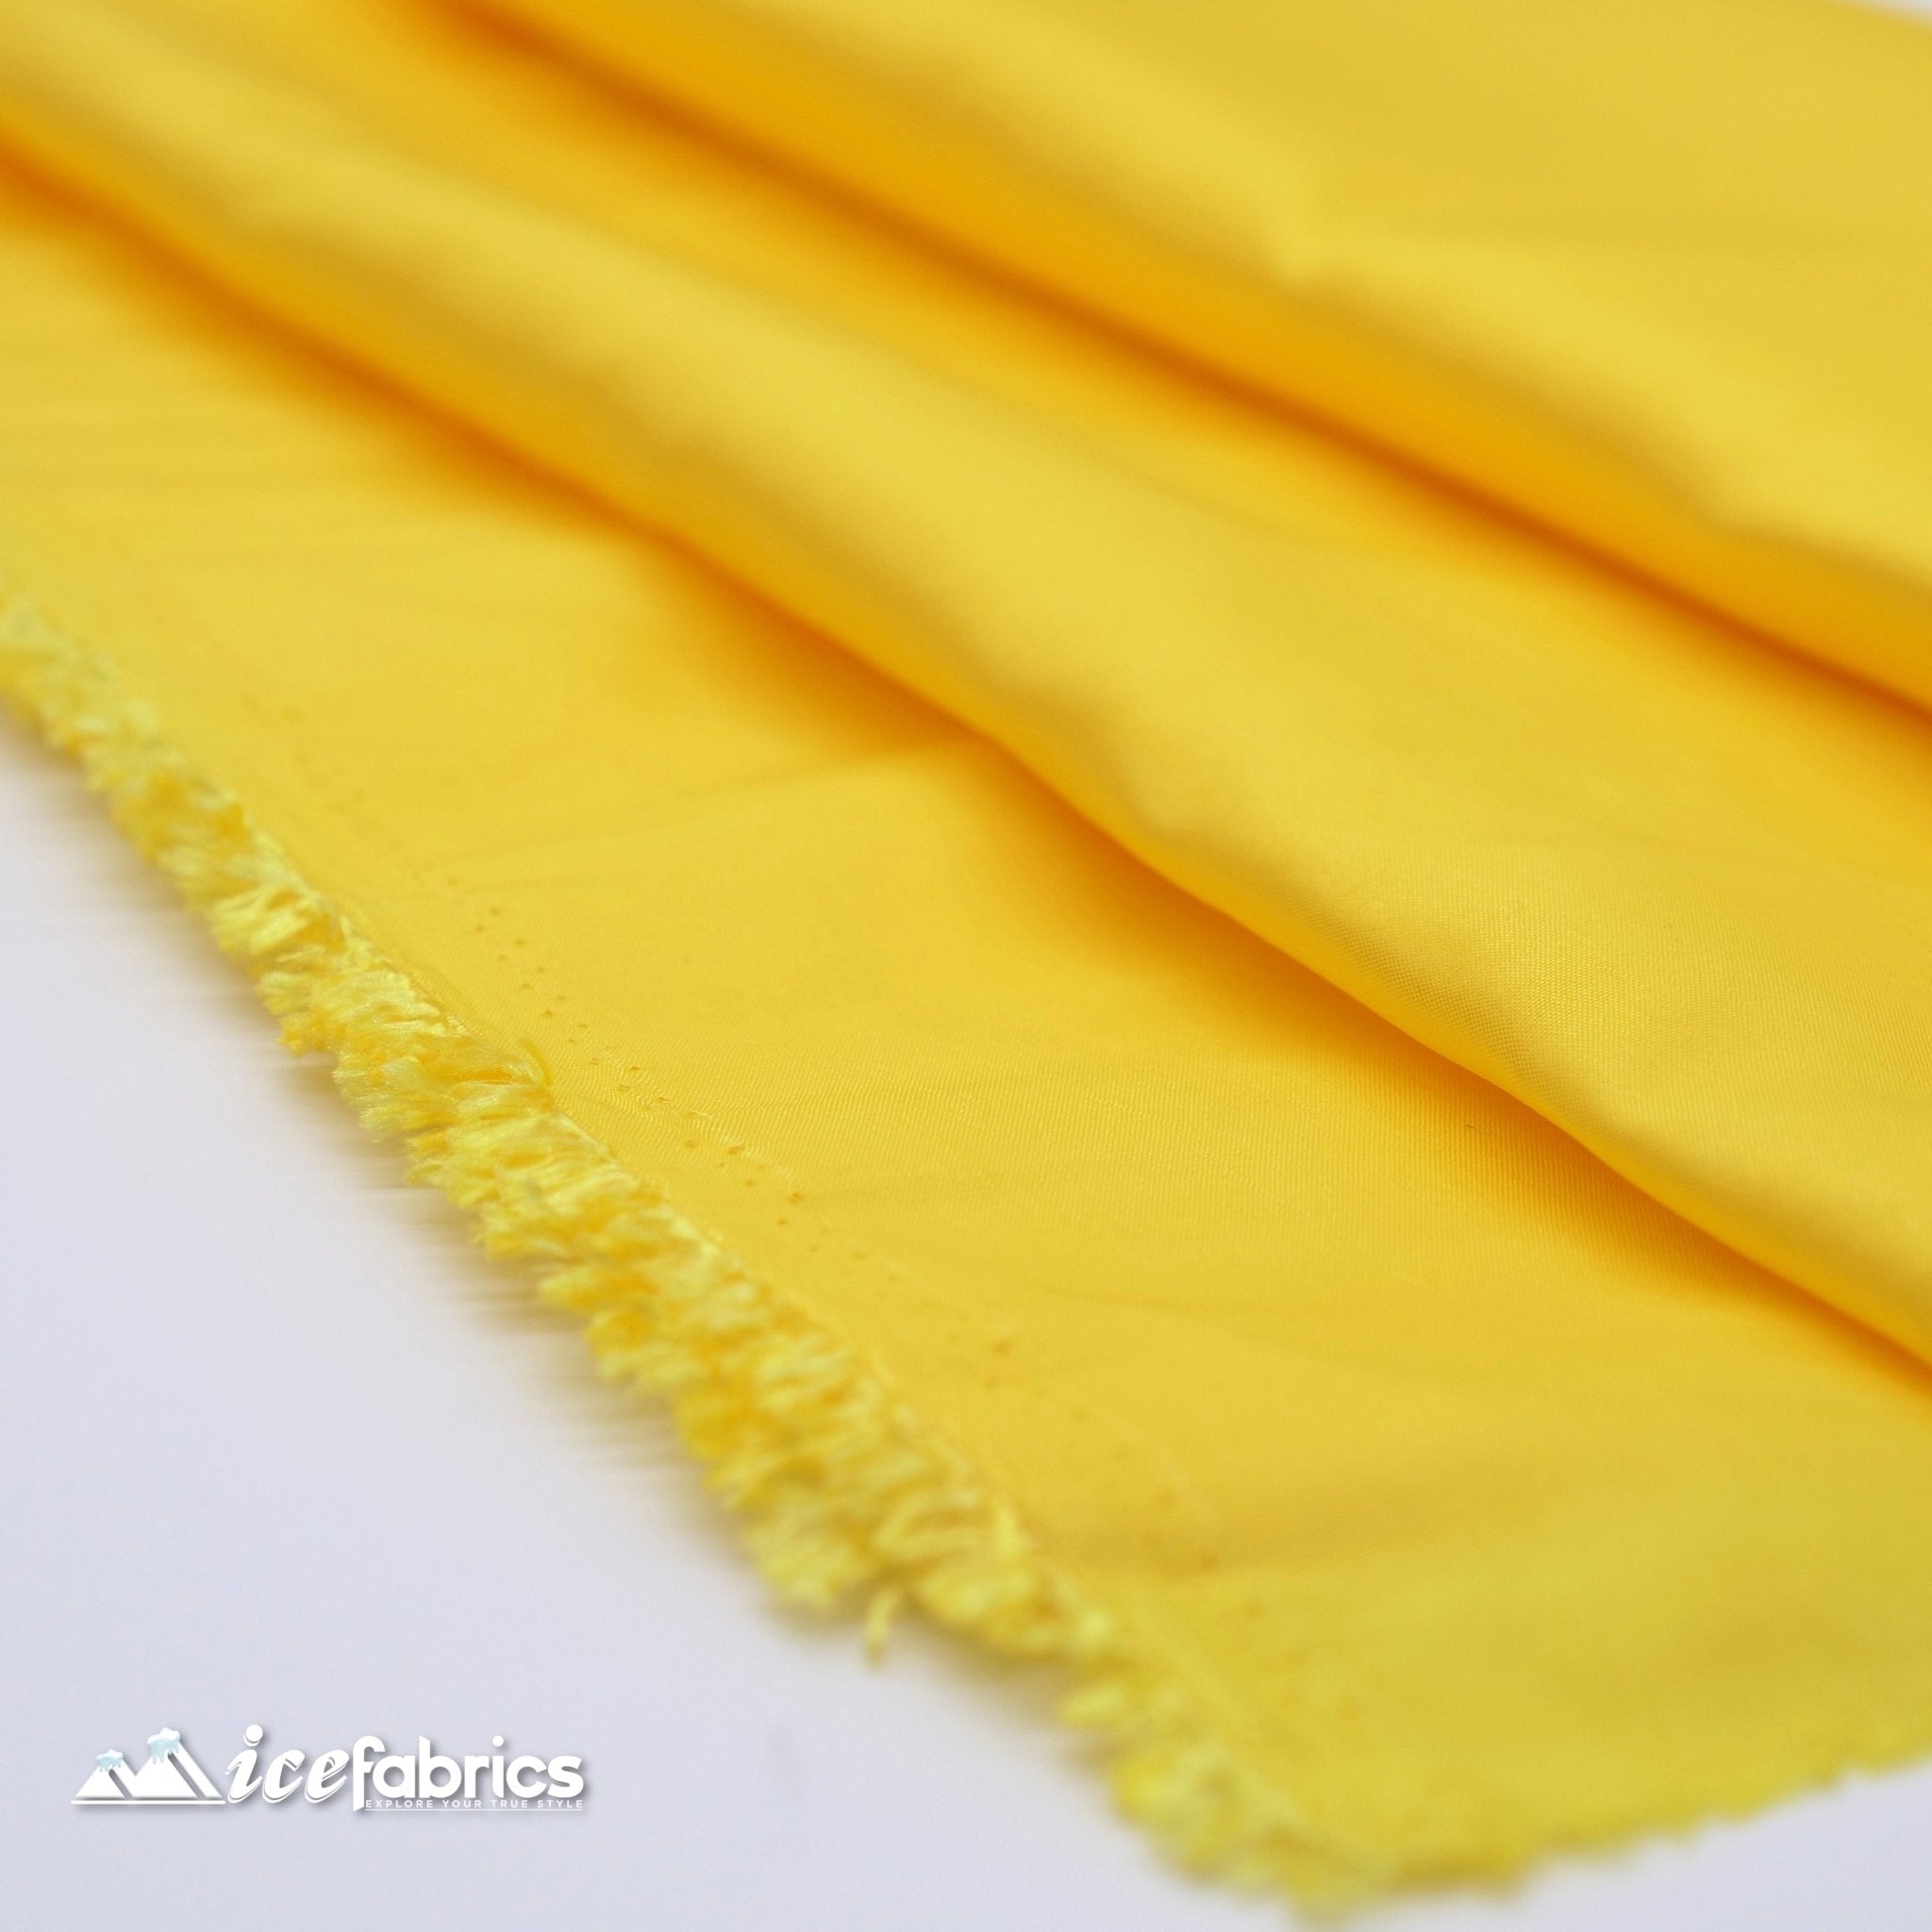 High Quality Solid Taffeta Fabric_ 60" Width_ By The YardTaffeta FabricICEFABRICICE FABRICSYellowHigh Quality Solid Taffeta Fabric_ 60" Width_ By The YardTaffeta FabricICEFABRICICE FABRICSYellowHigh Quality Solid Taffeta Fabric_ 60" Width_ By The Yard ICEFABRIC Yellow